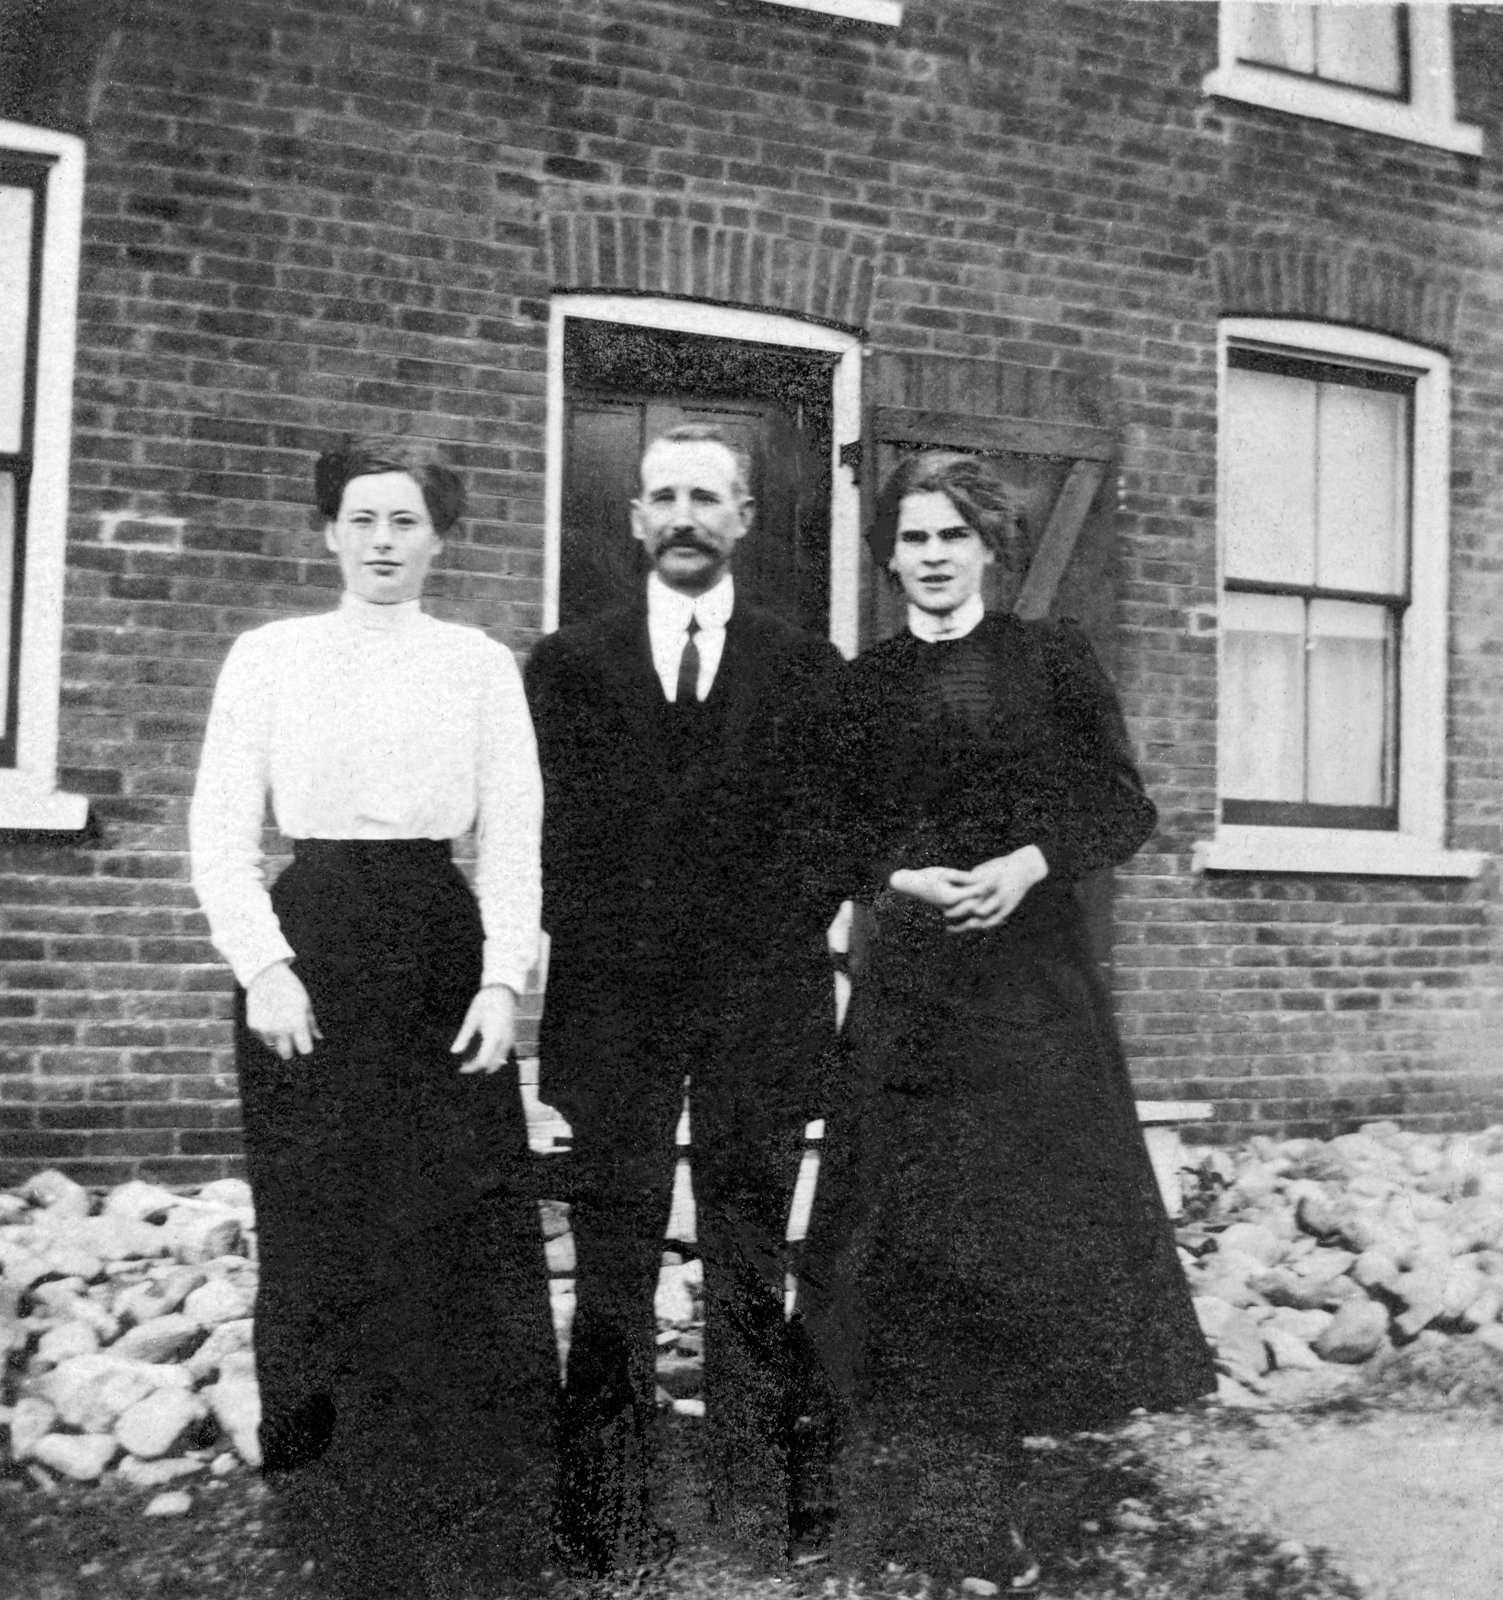 Benjamin Duffy with his nieces Nellie (in black) and Vera Duffy (in white)